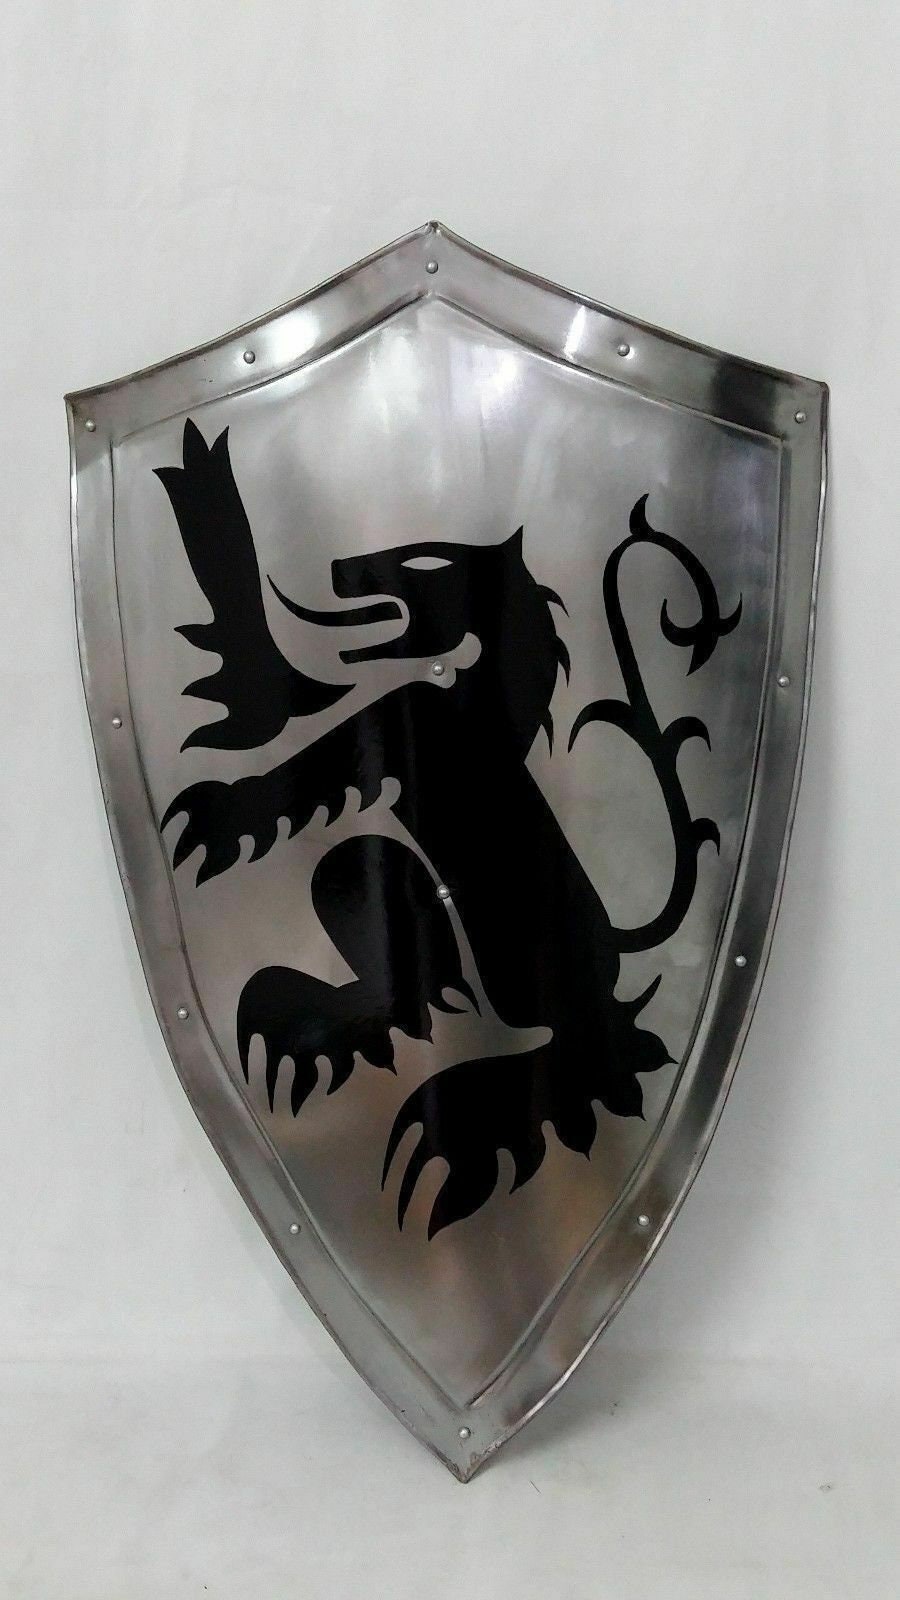 Details about   MEDIEVAL KNIGHT DRAGON SHIELD All Metal Armor Handcrafted Battle HALLOWEEN Gift 